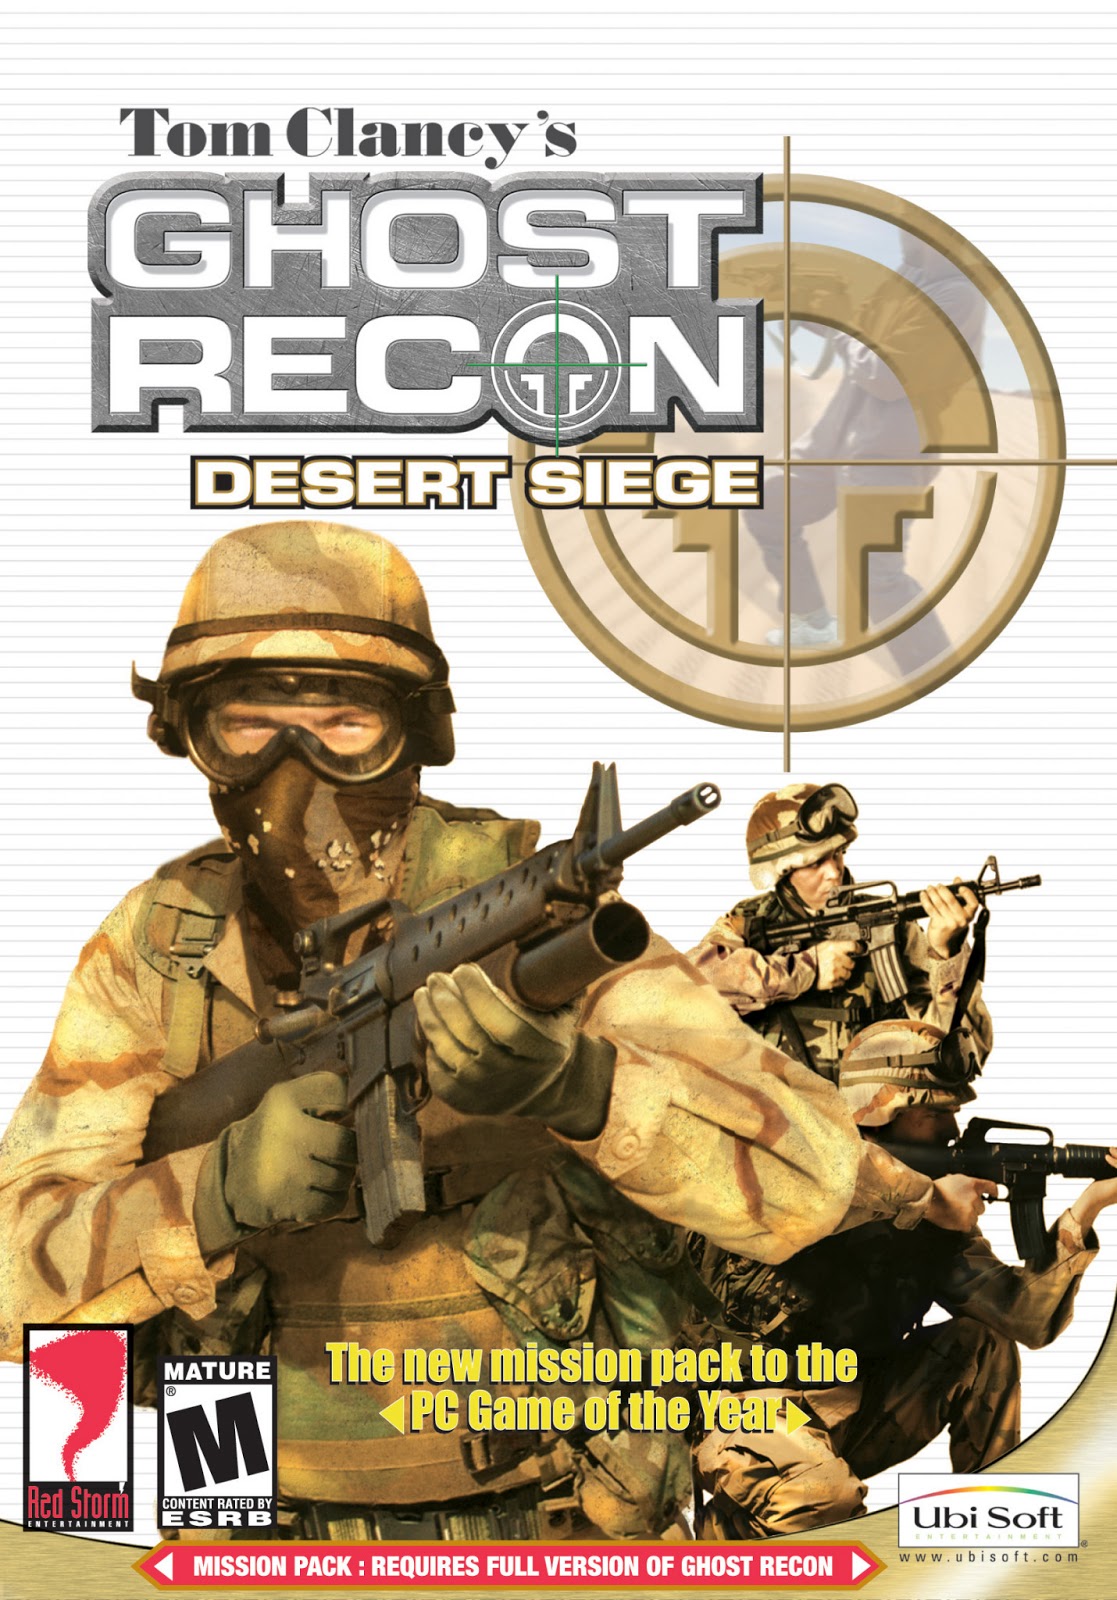 free ghost recon full version